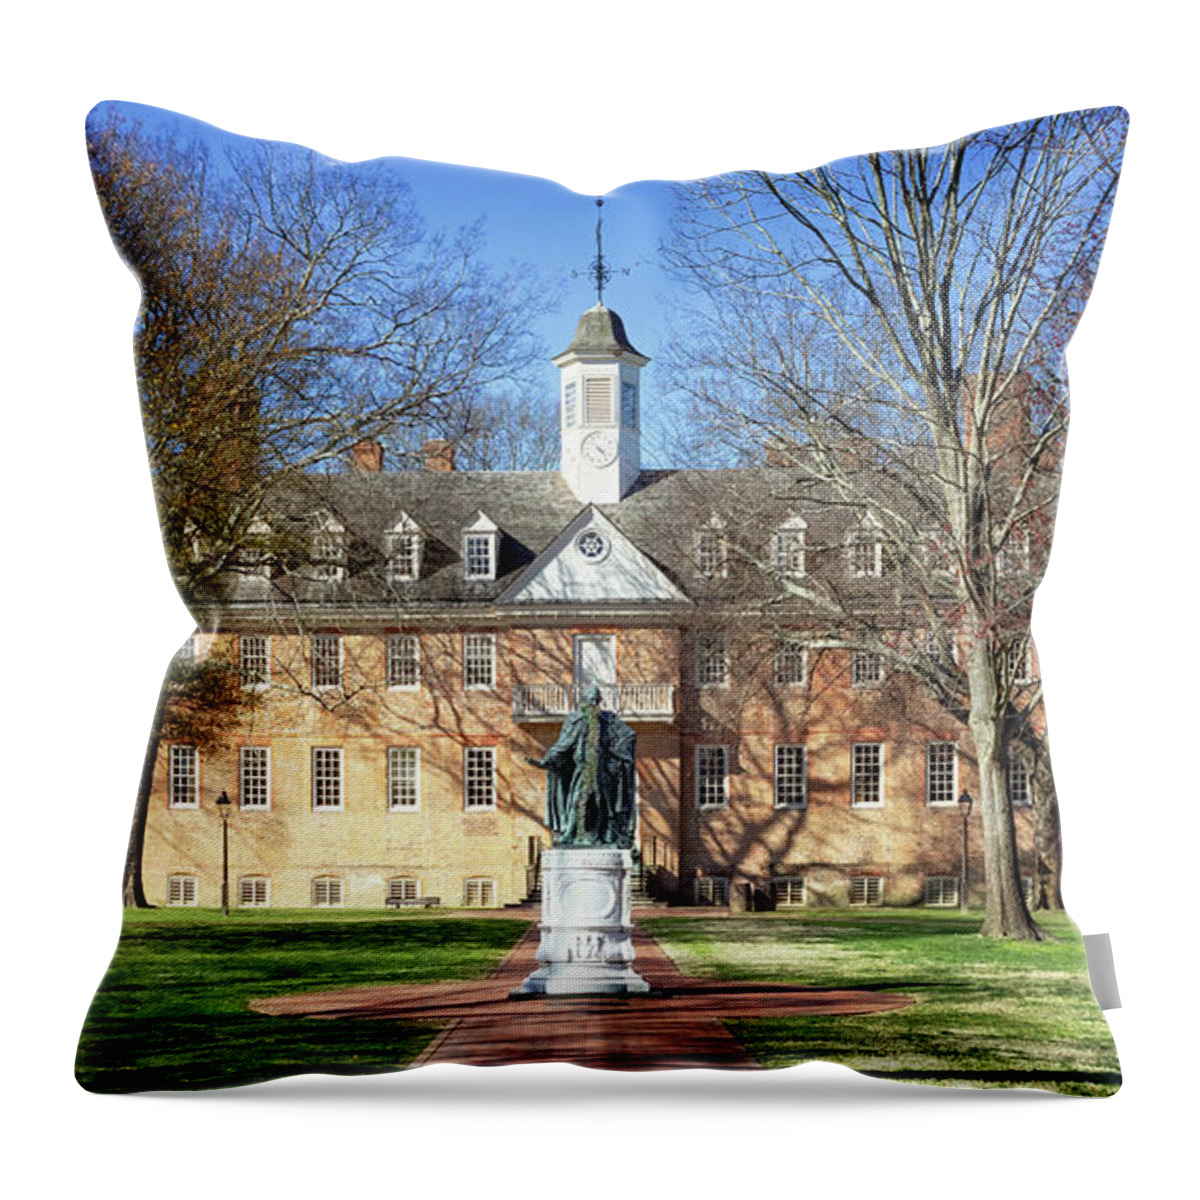 Wren Building Throw Pillow featuring the photograph The Wren Building - Williamsburg, Virginia by Susan Rissi Tregoning